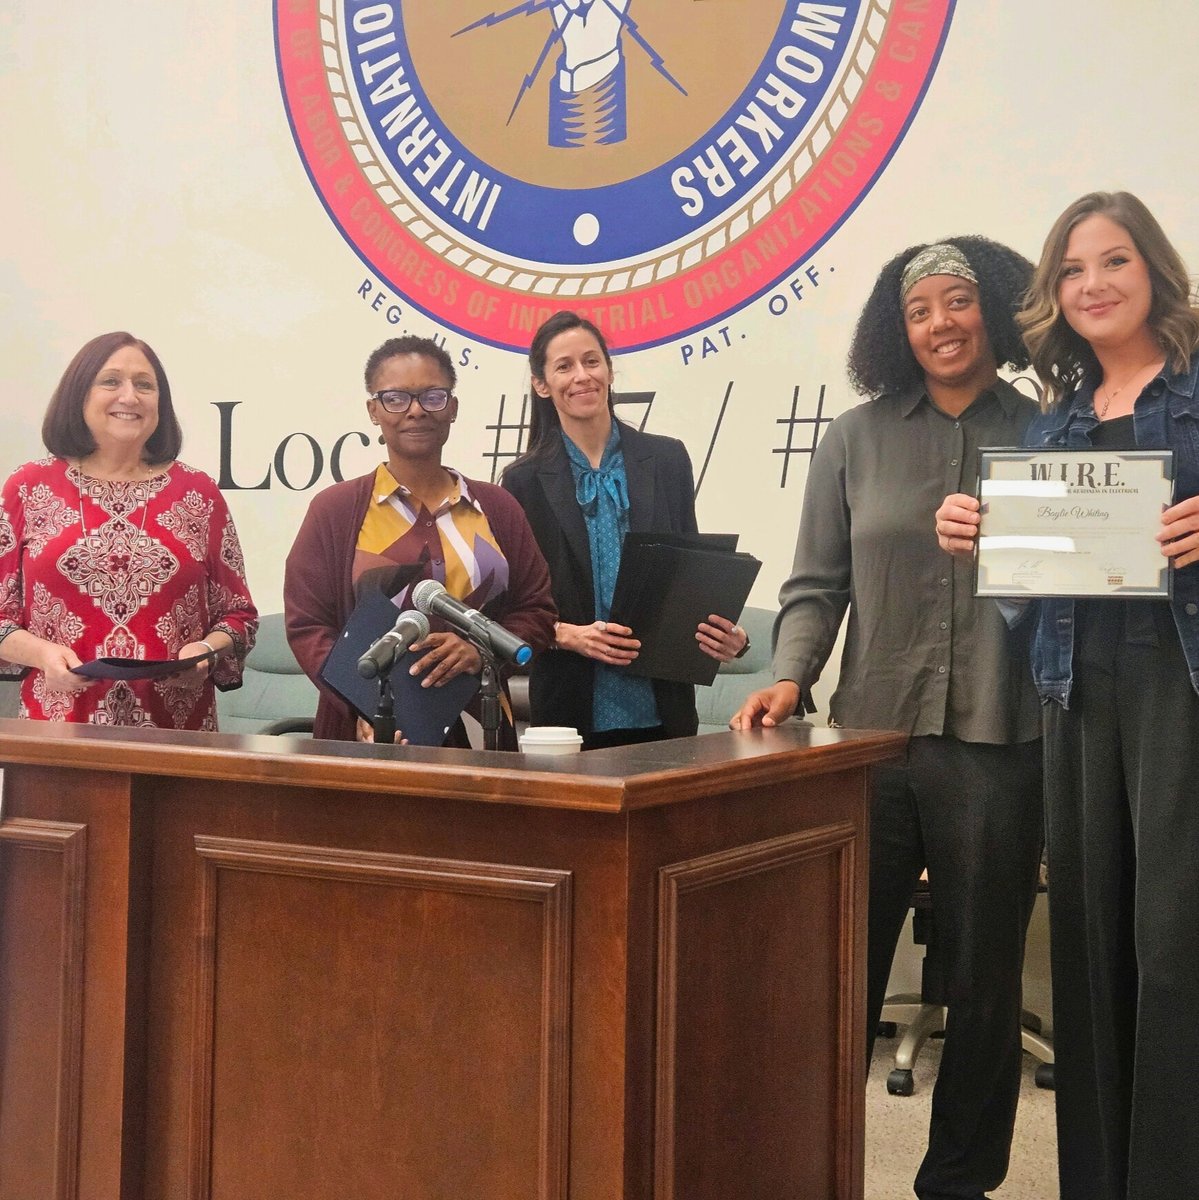 Last week, the Second District celebrated the first graduation of the W.I.R.E. Program. Continue shattering barriers for women in the Electrical industry. Congratulations Crew 1!
#TradeswomenSisterhoodWIRE #ElectricalIndustry #RiversideCounty #WomenEmpowerment